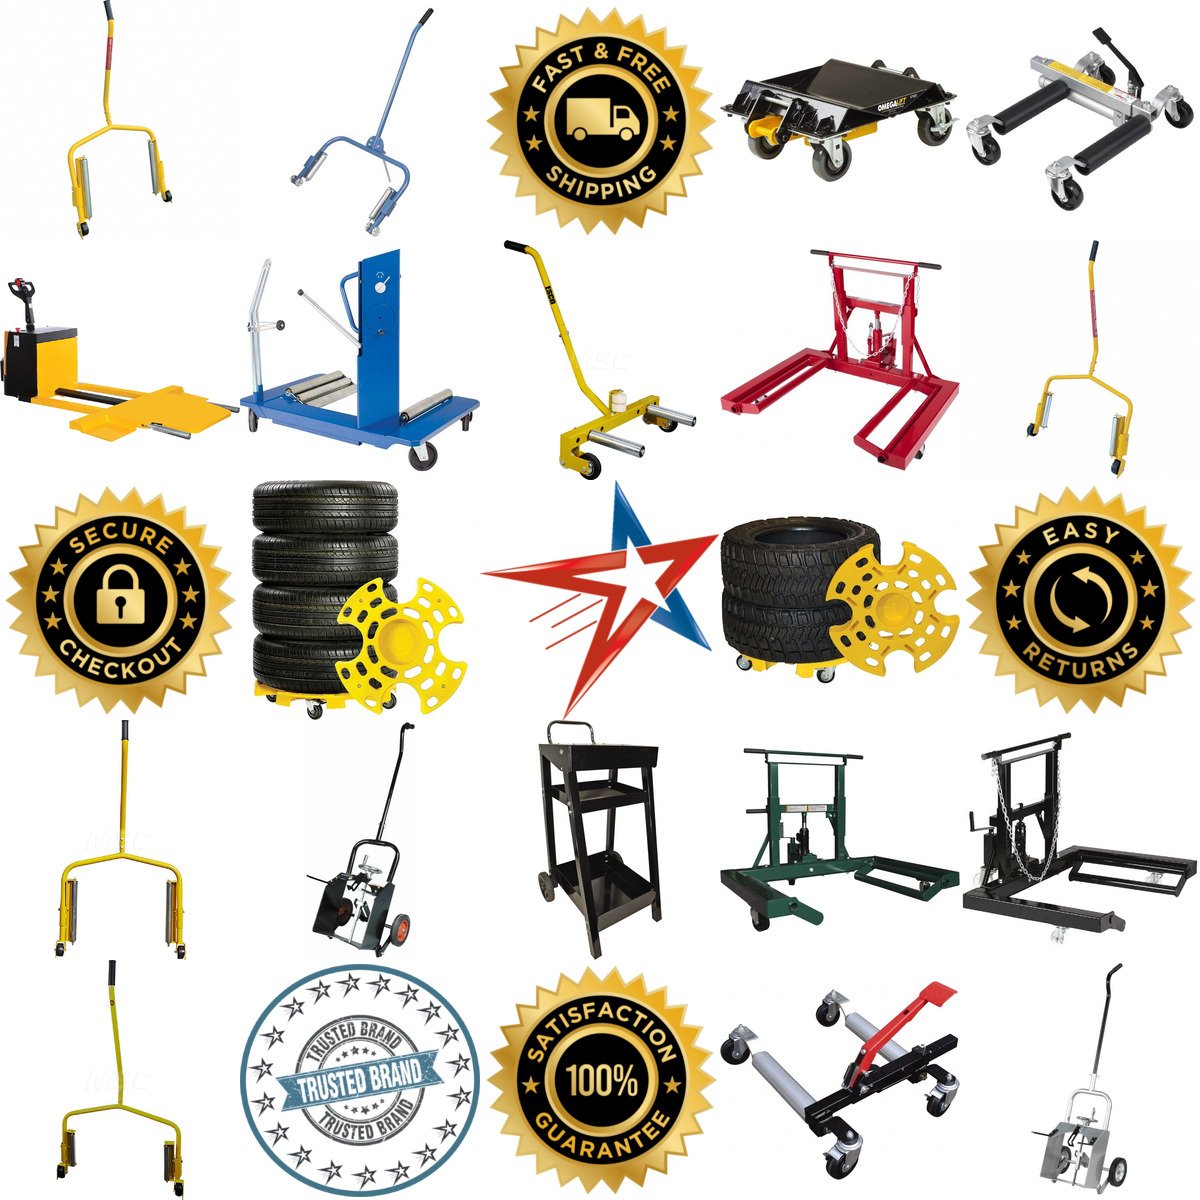 A selection of Dollies and Hand Trucks products on GoVets